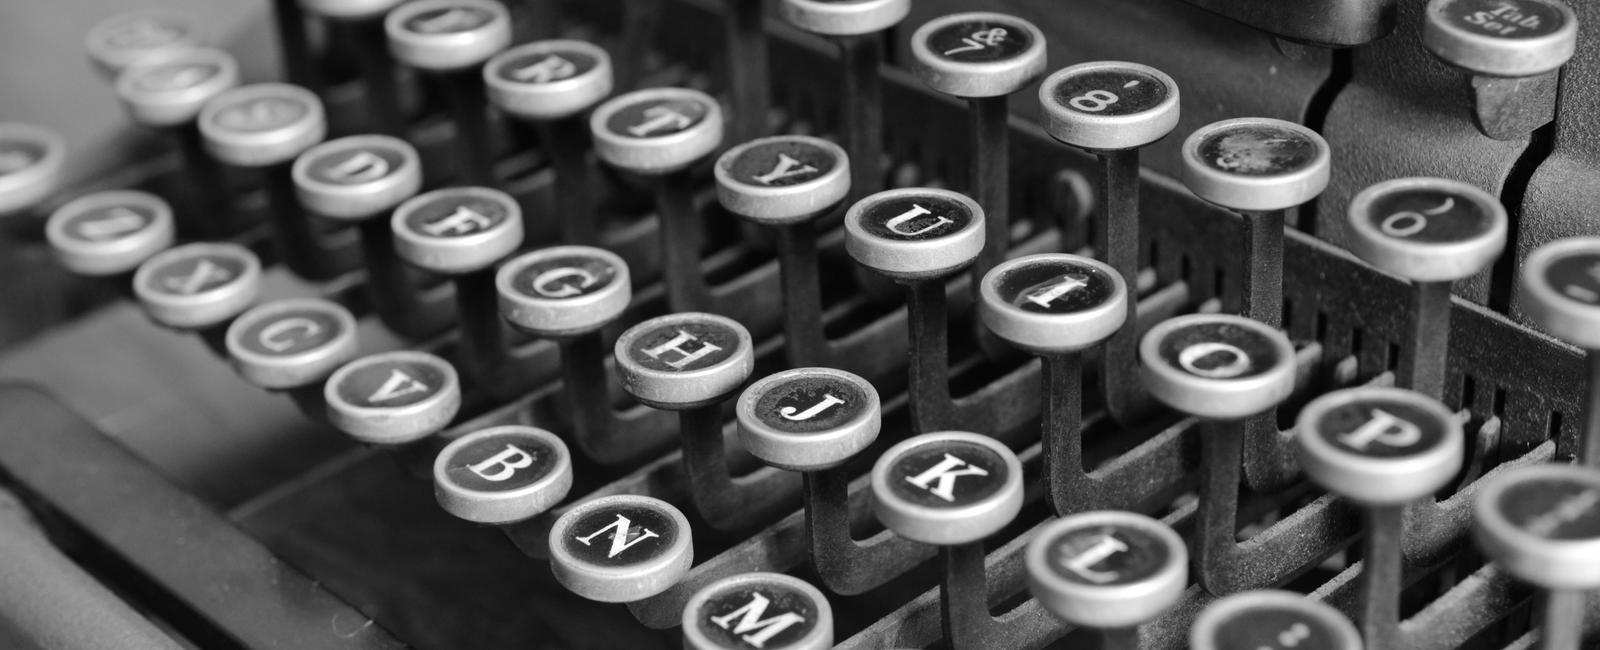 The longest word comprised of one row on the keyboard is typewriter